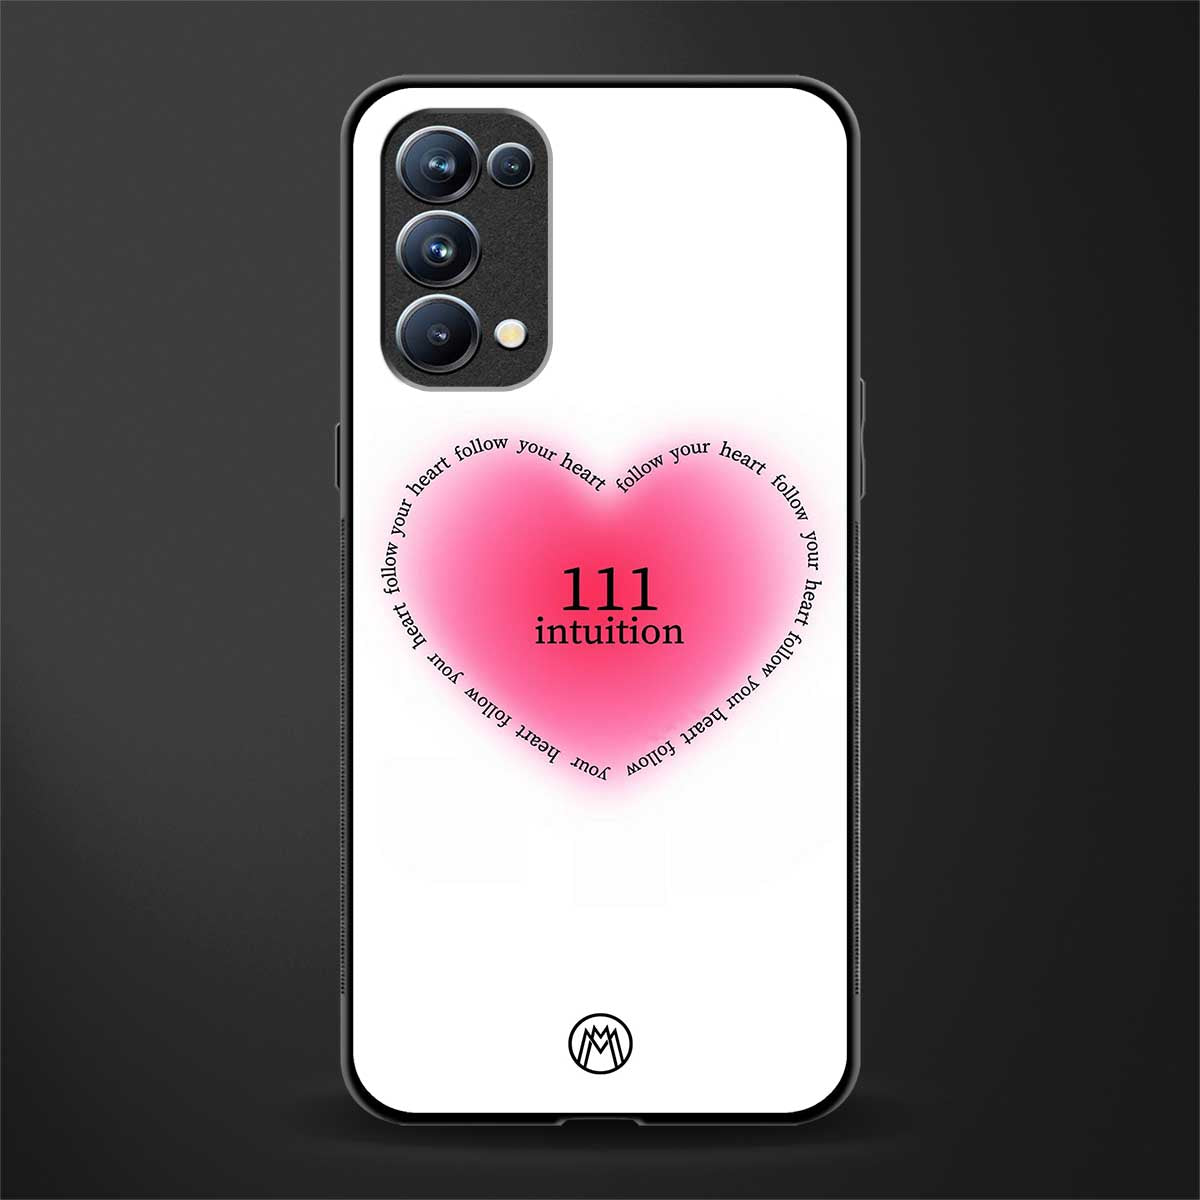 111 intuition glass case for oppo reno 5 pro image